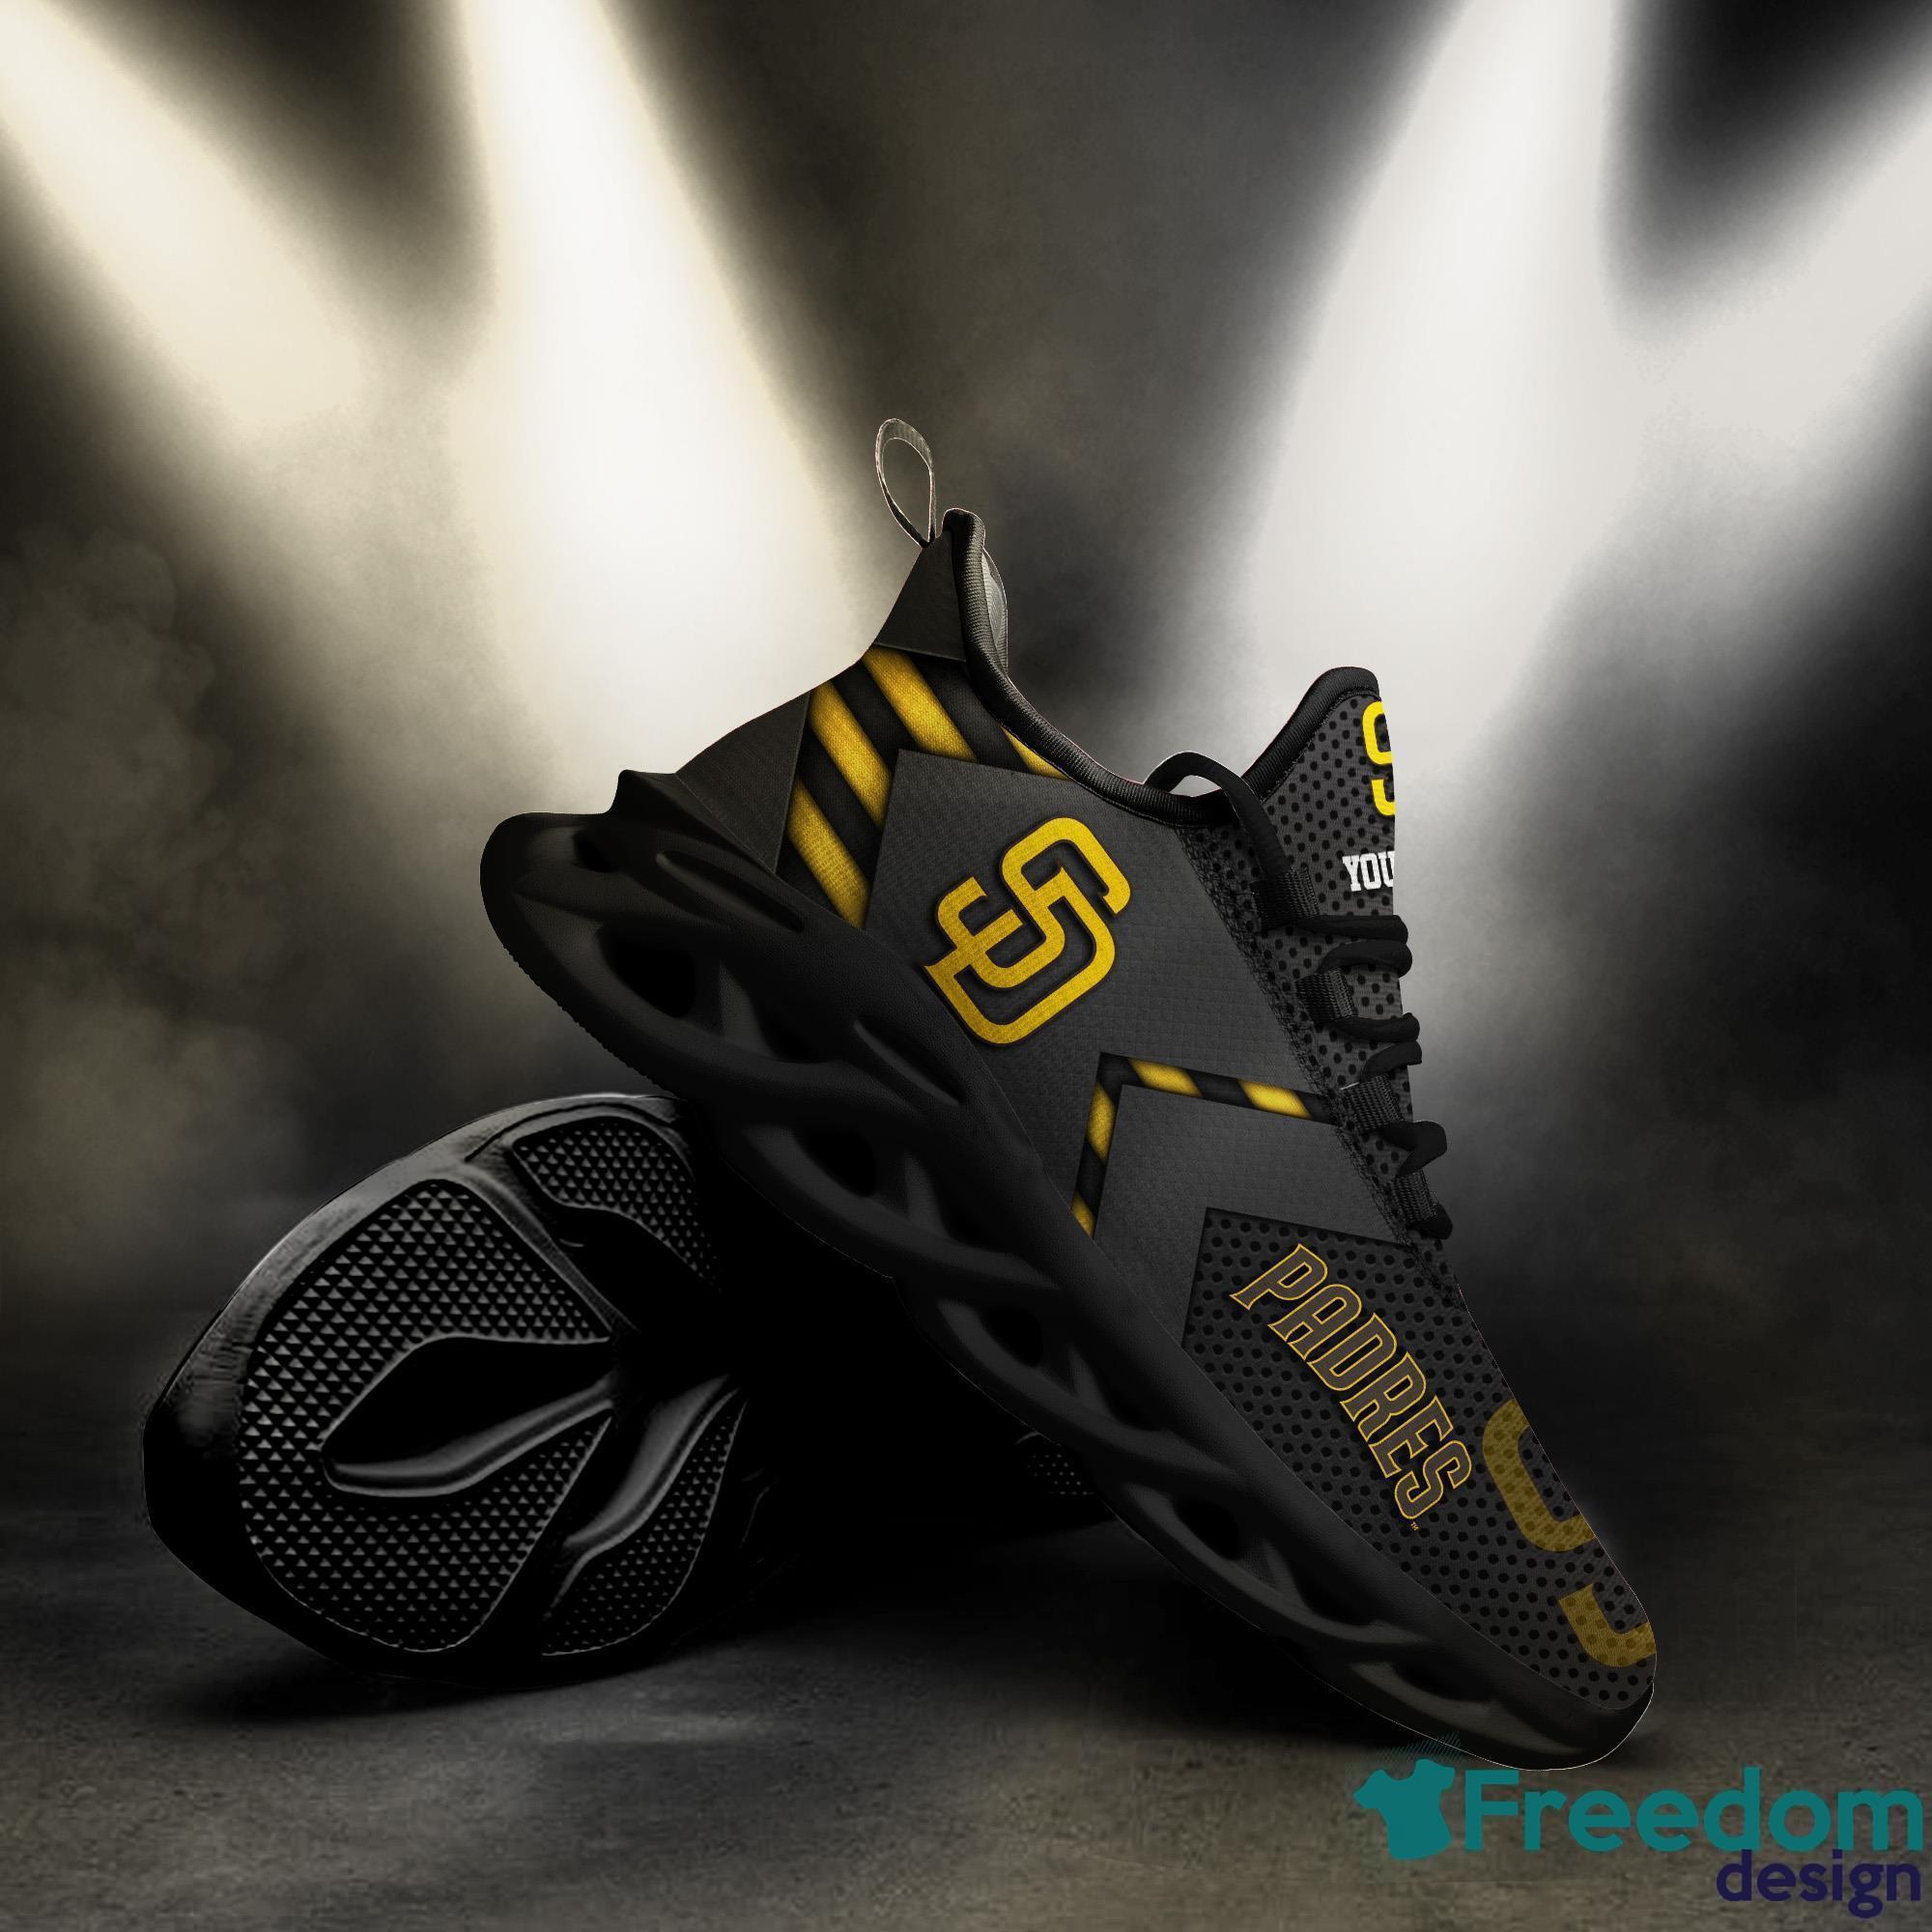 San Diego Padres Logo Running Sneaker Max Soul Shoes Gift For Men